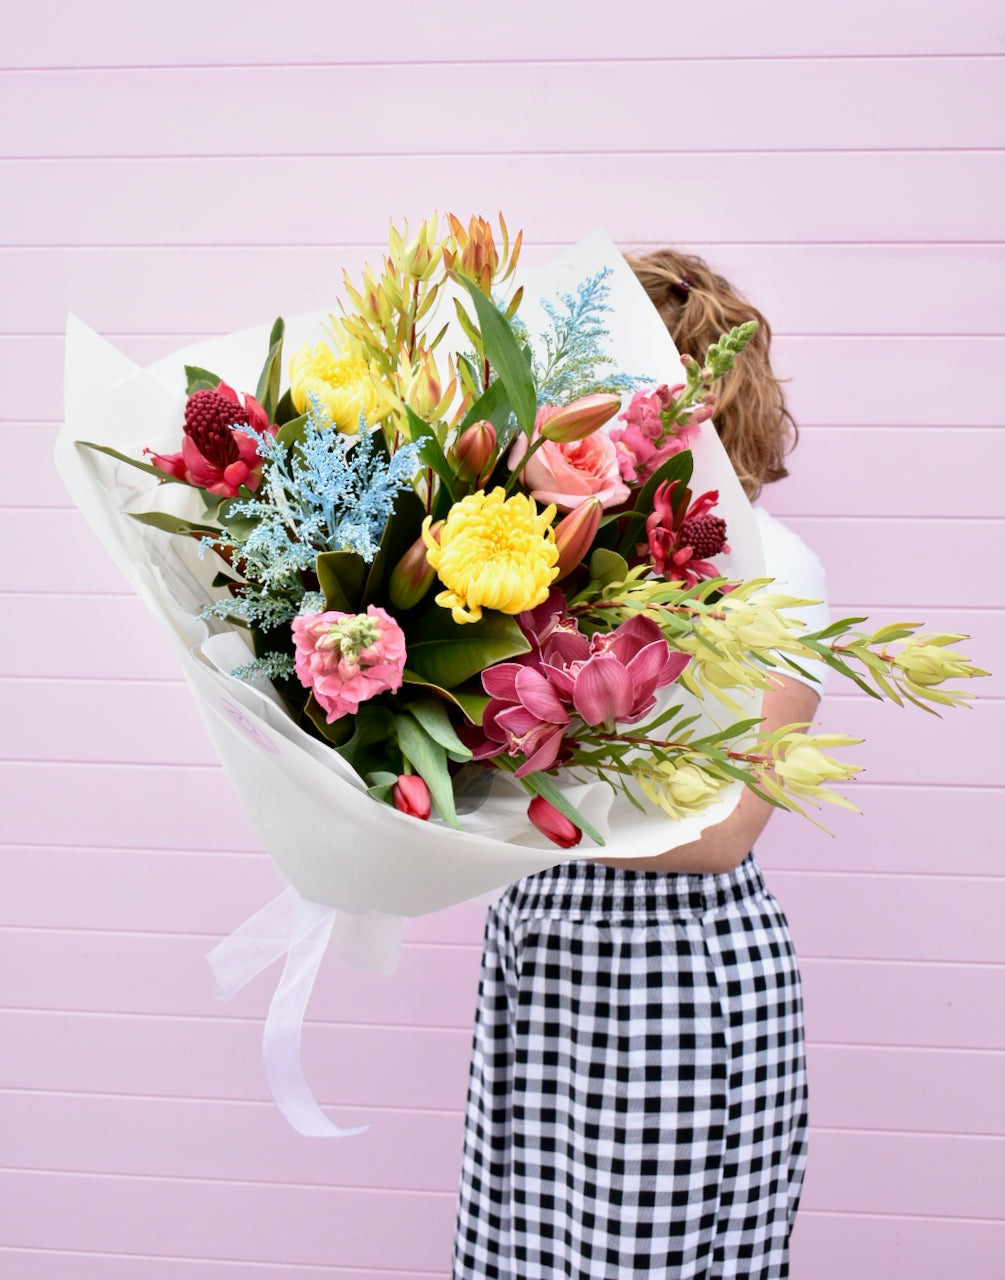 Florist holding a bright fresh flower bouquet. Blue, pink, red and yellow with roses, chrysanthemums and orchids